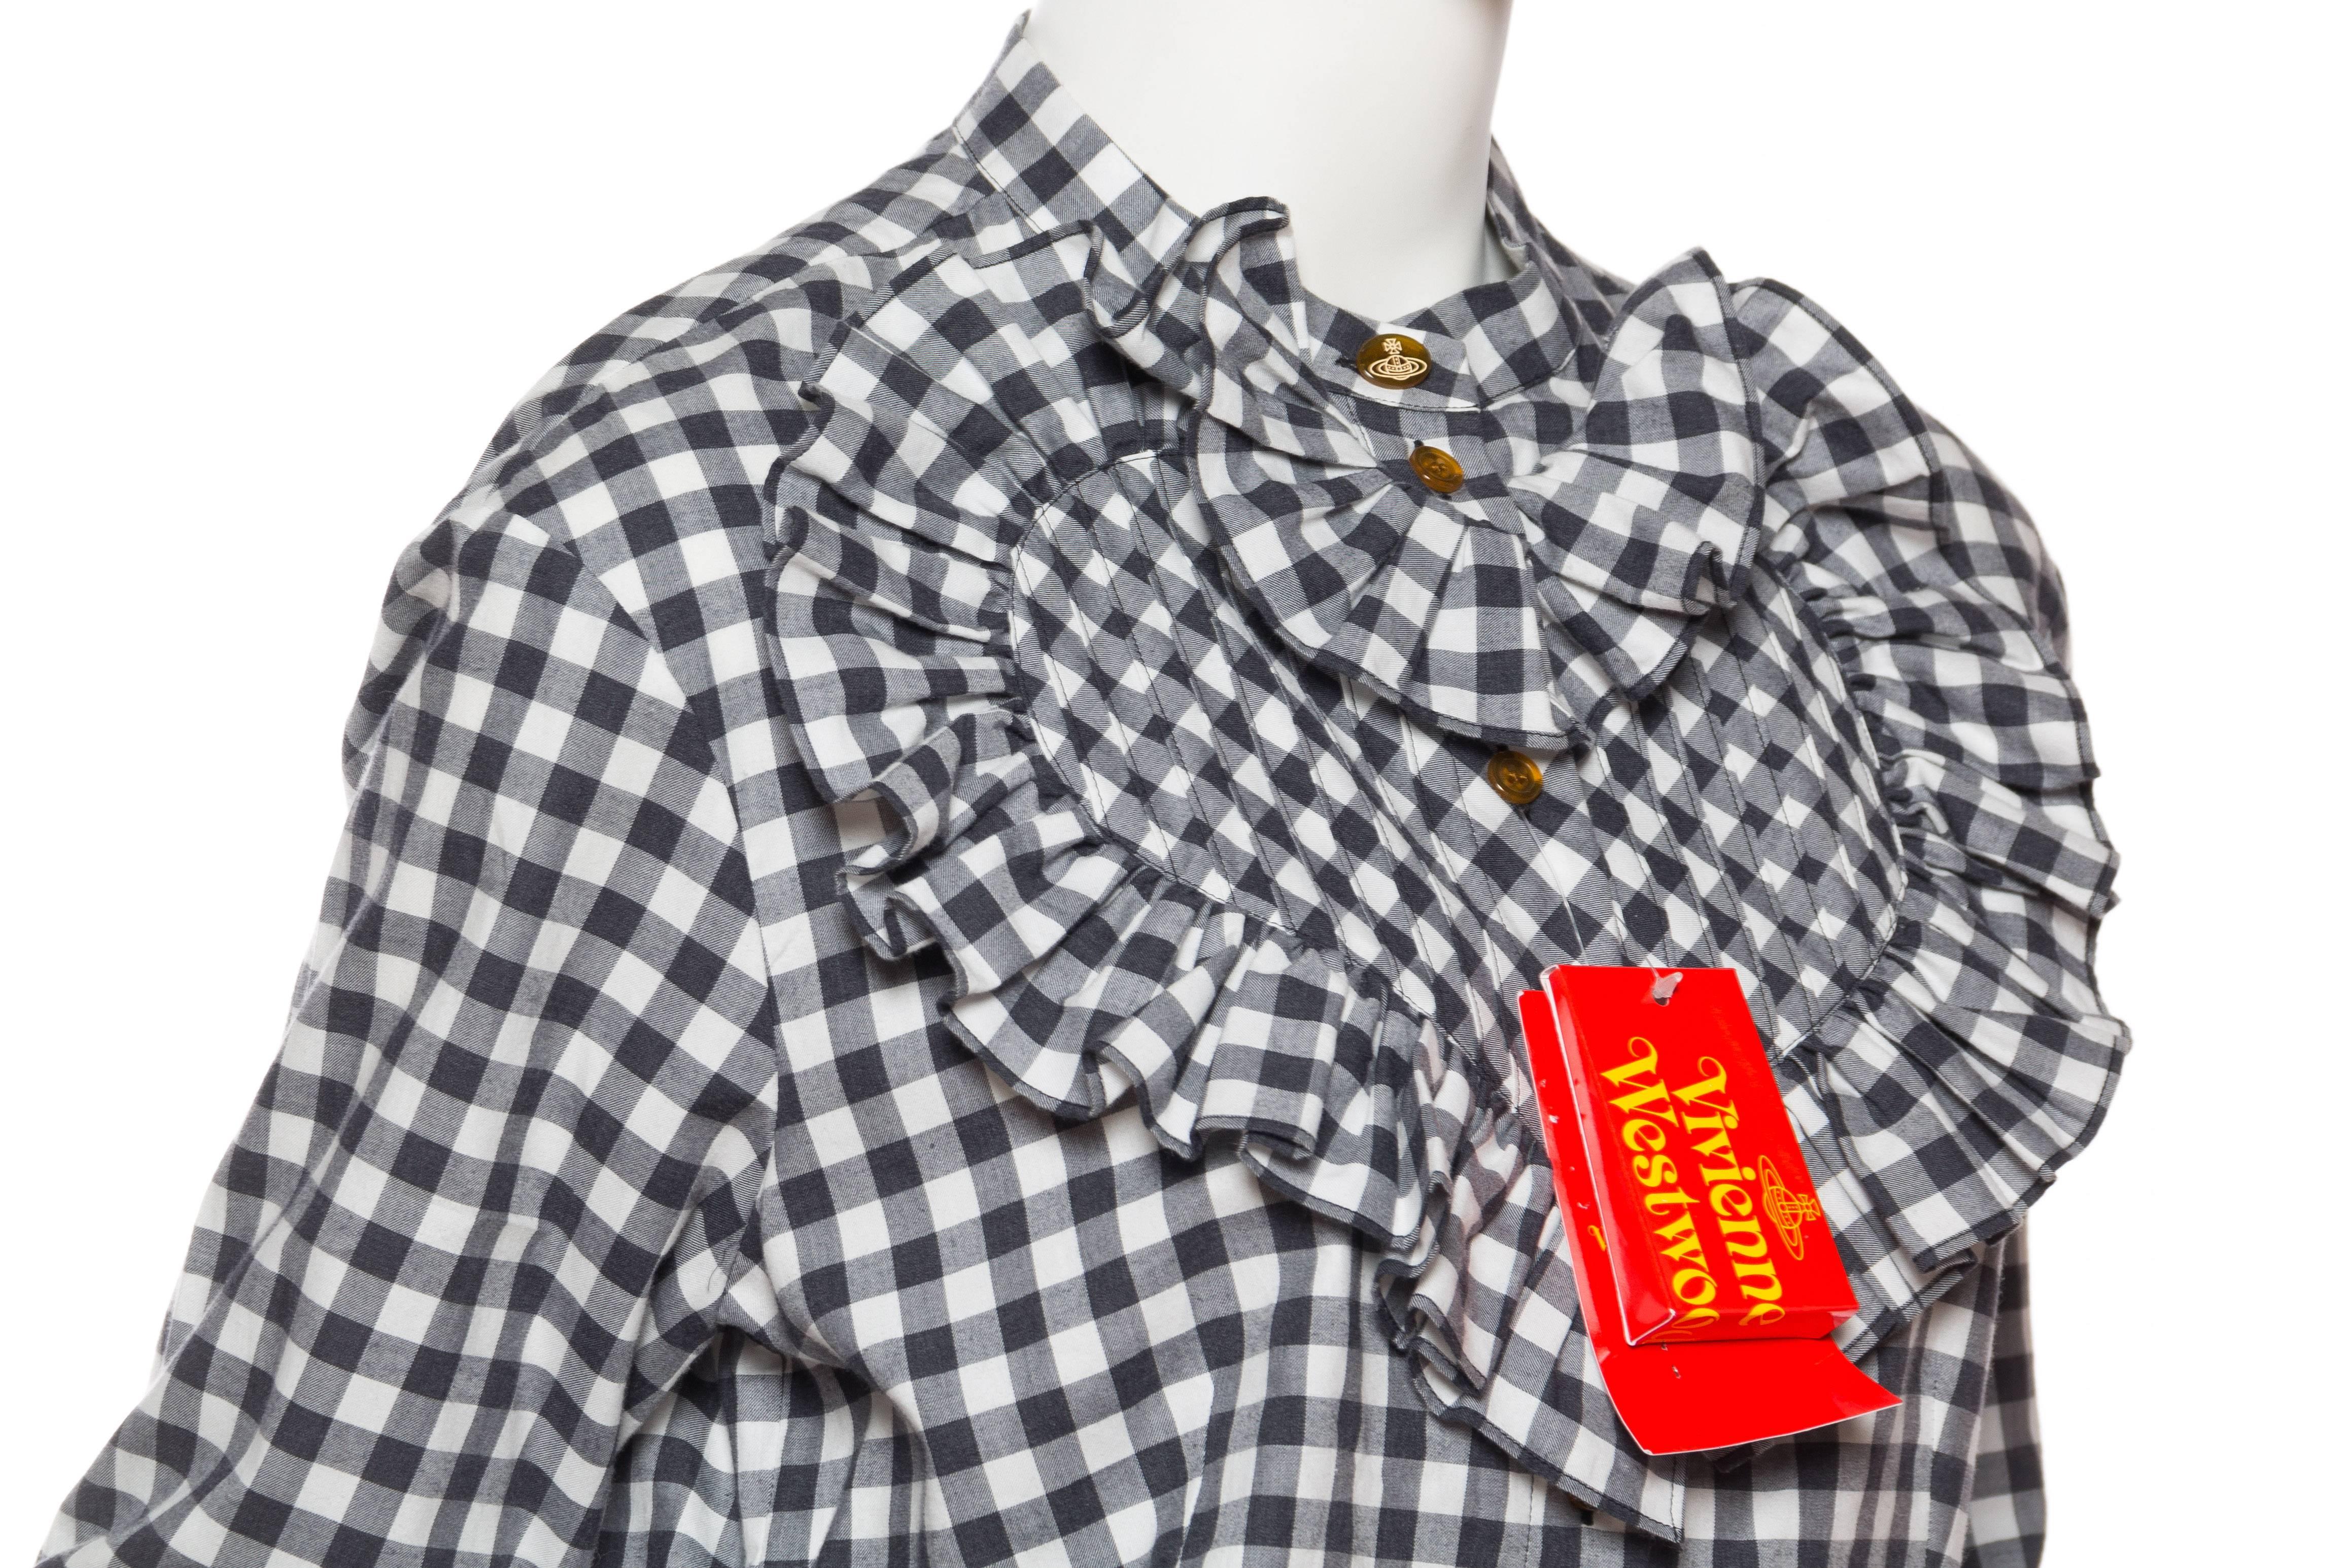 Women's 2000 VIVIENNE WESTWOOD Cotton Gingham Ruffled Heart Blouse  NWT